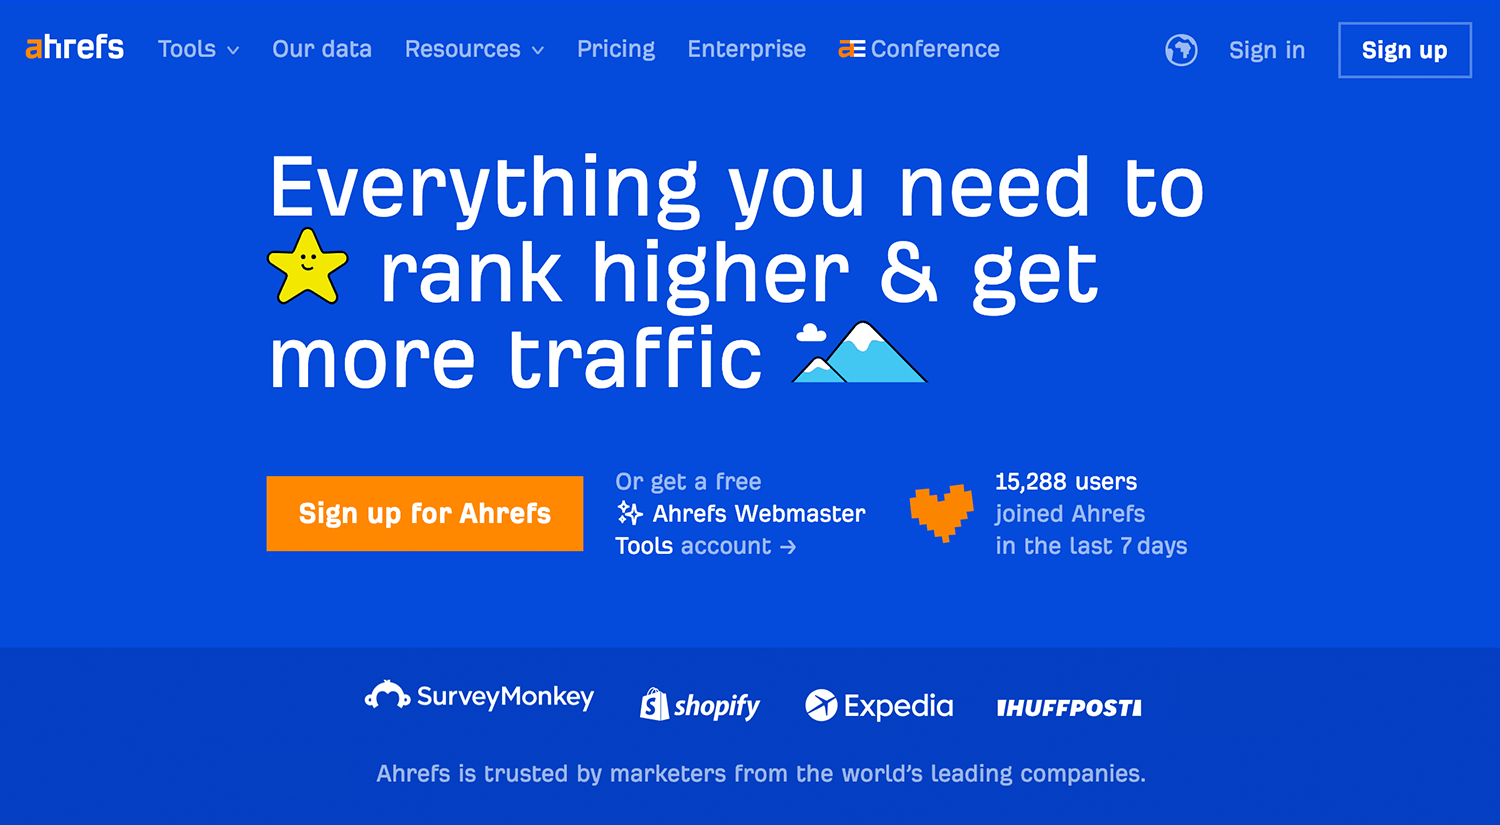 Hero image of Ahrefs promoting tools for higher rankings and more traffic